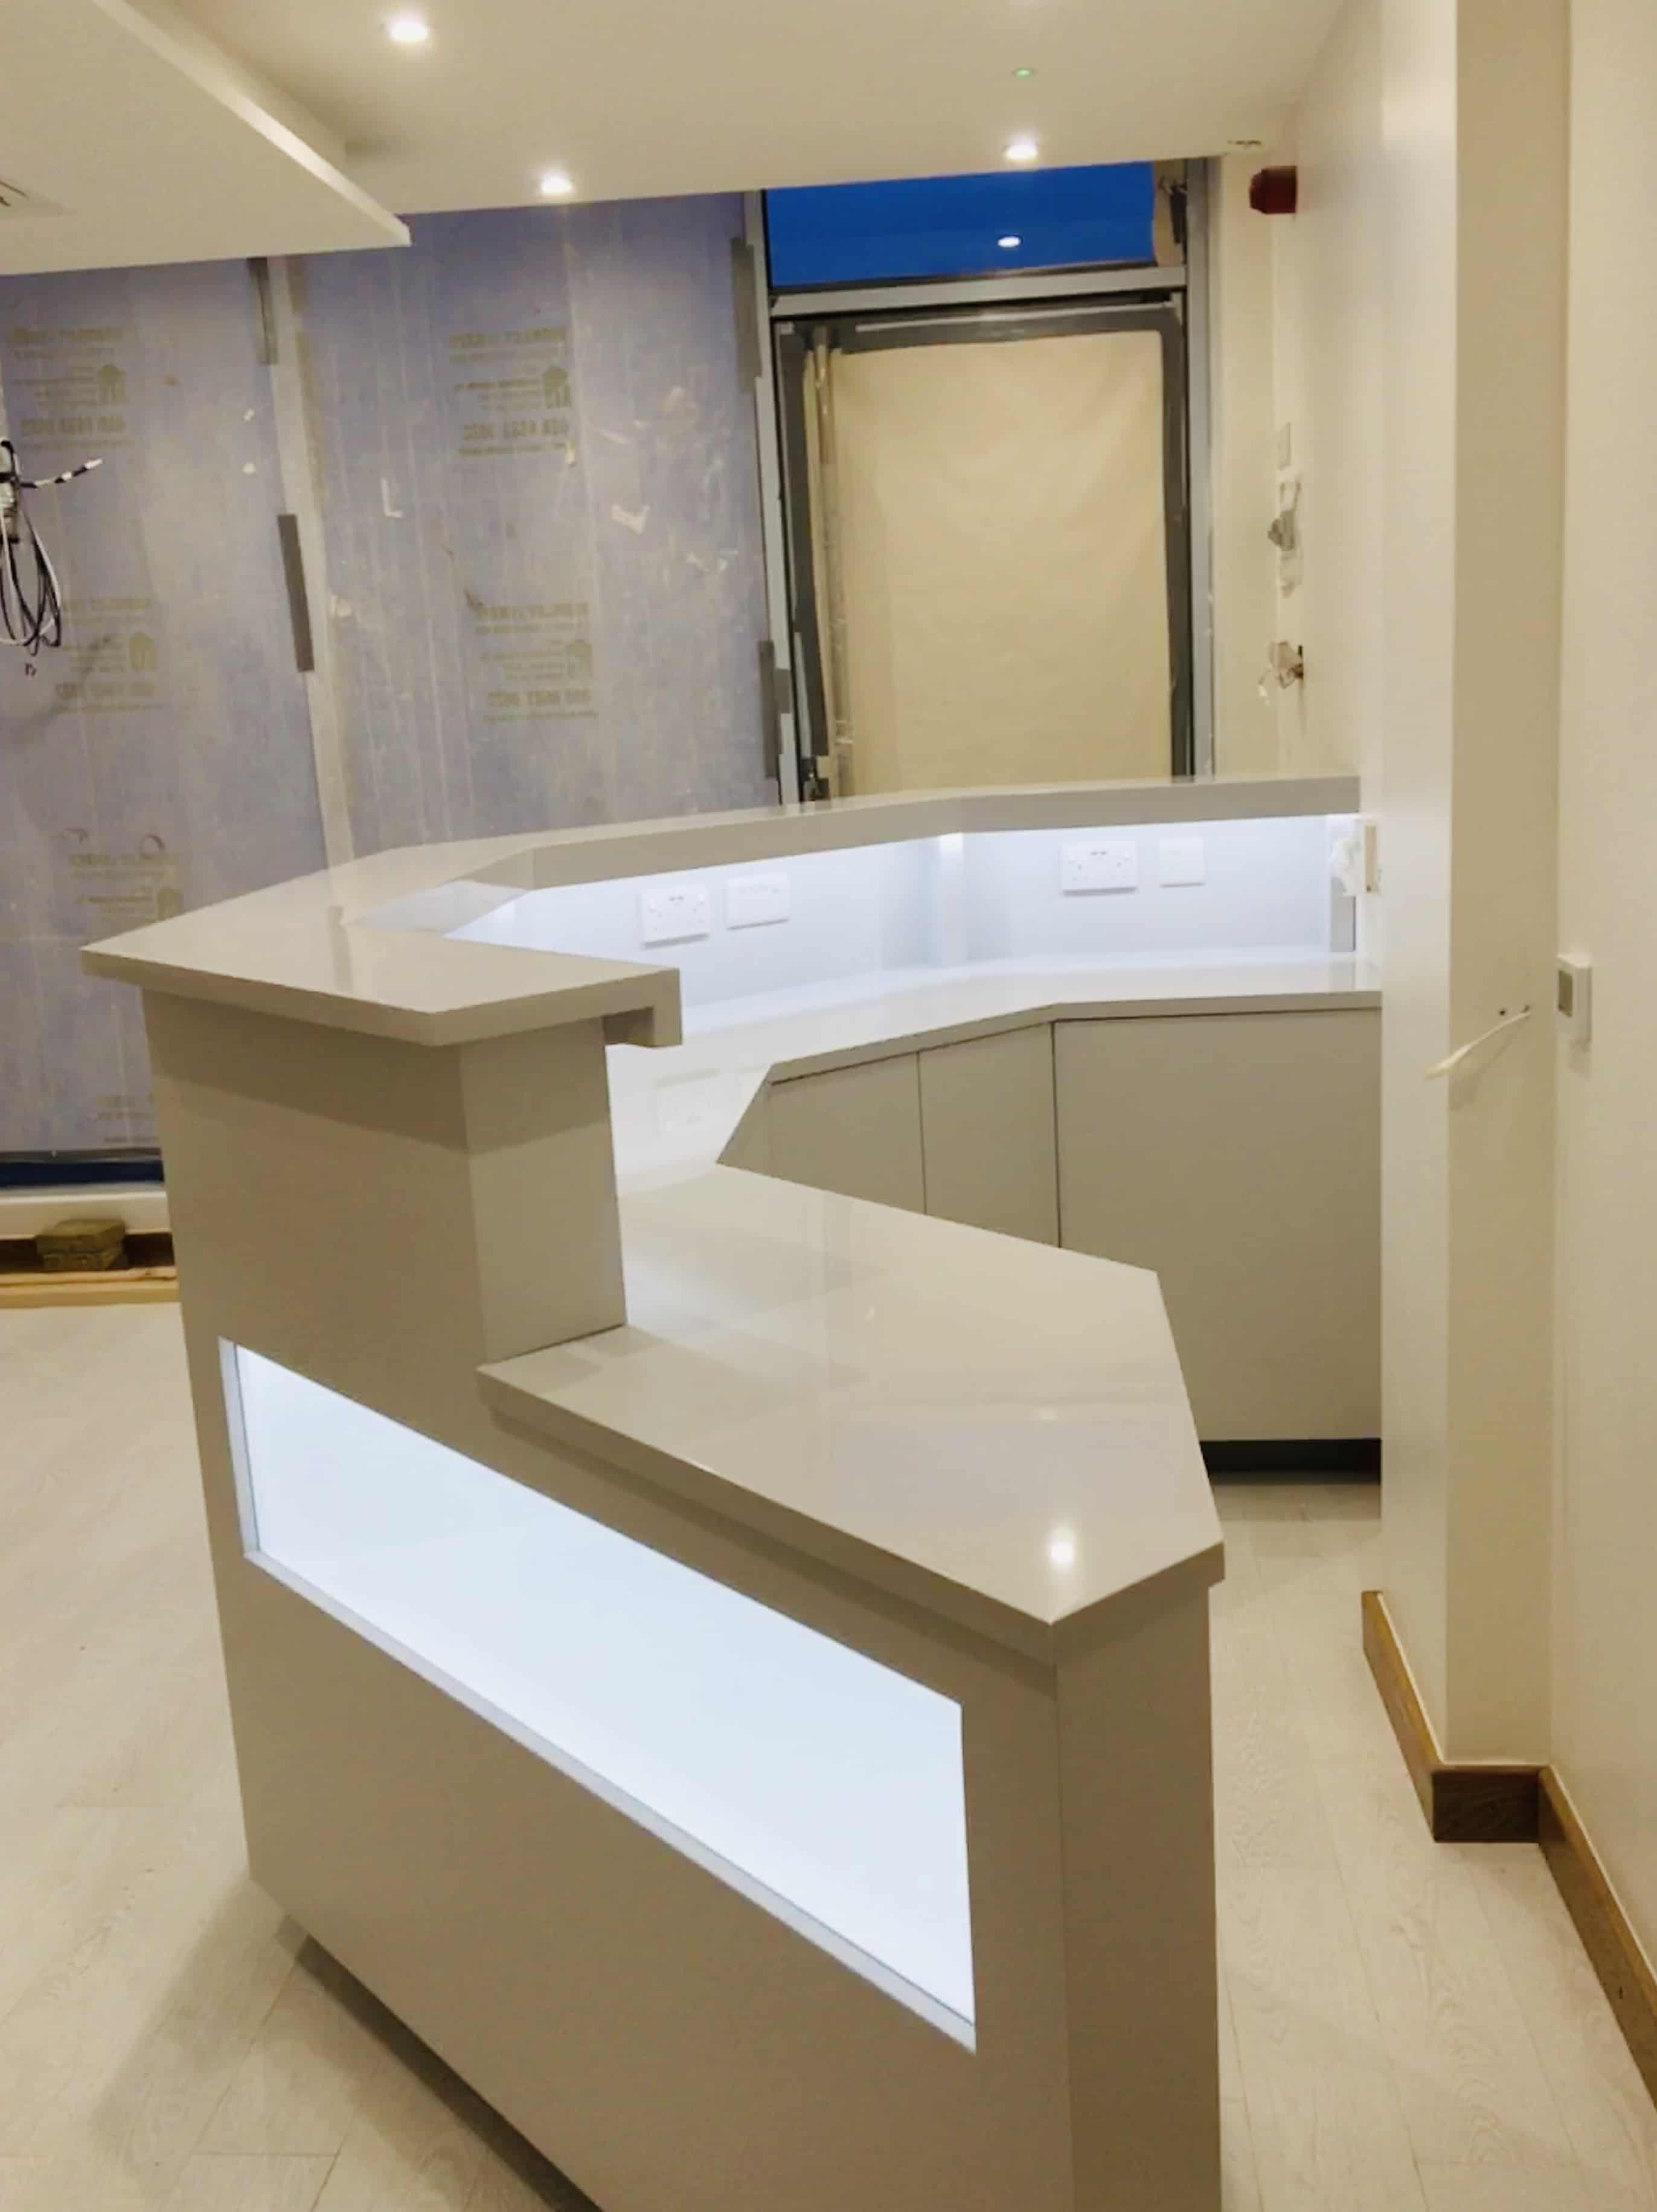 Reception desk with glass window in spa clinic.